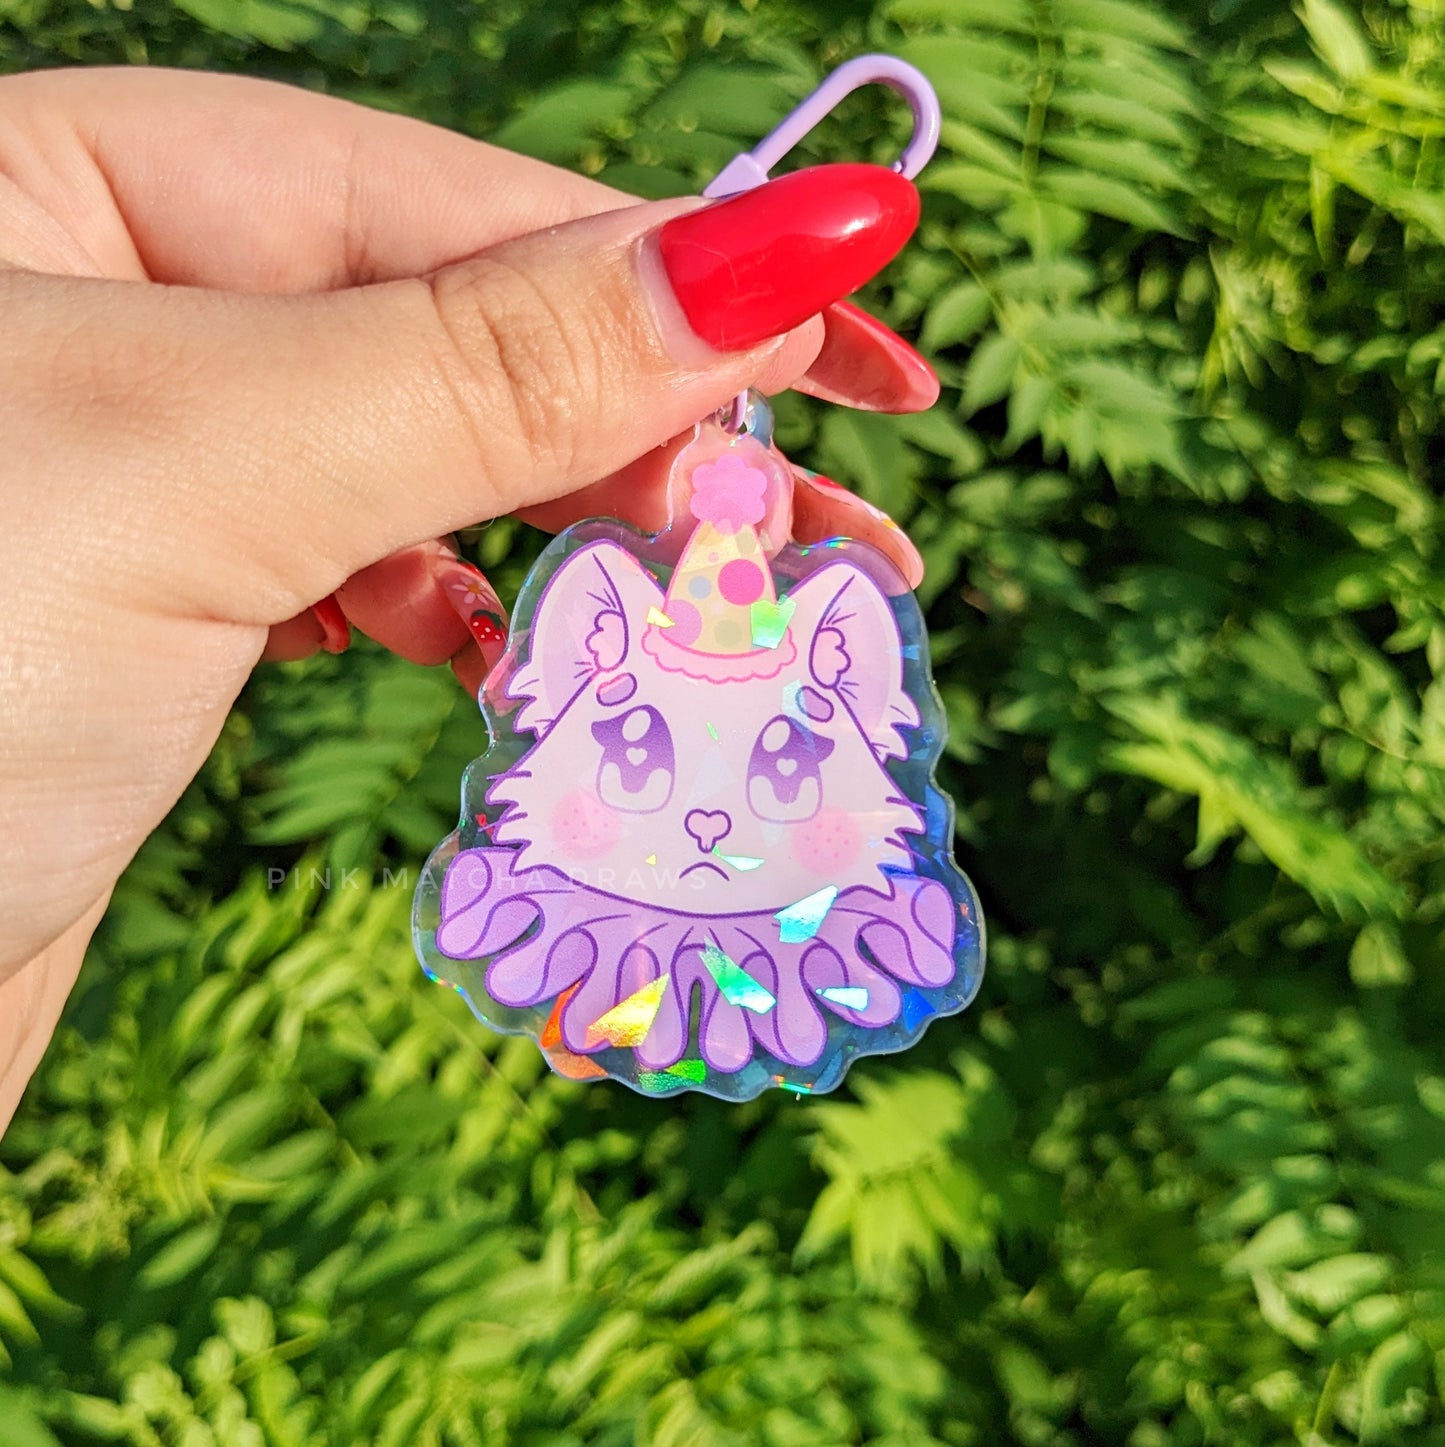 Sad Cat Clown Holographic Charm-Keychain-Candy Skies-Candy Skies